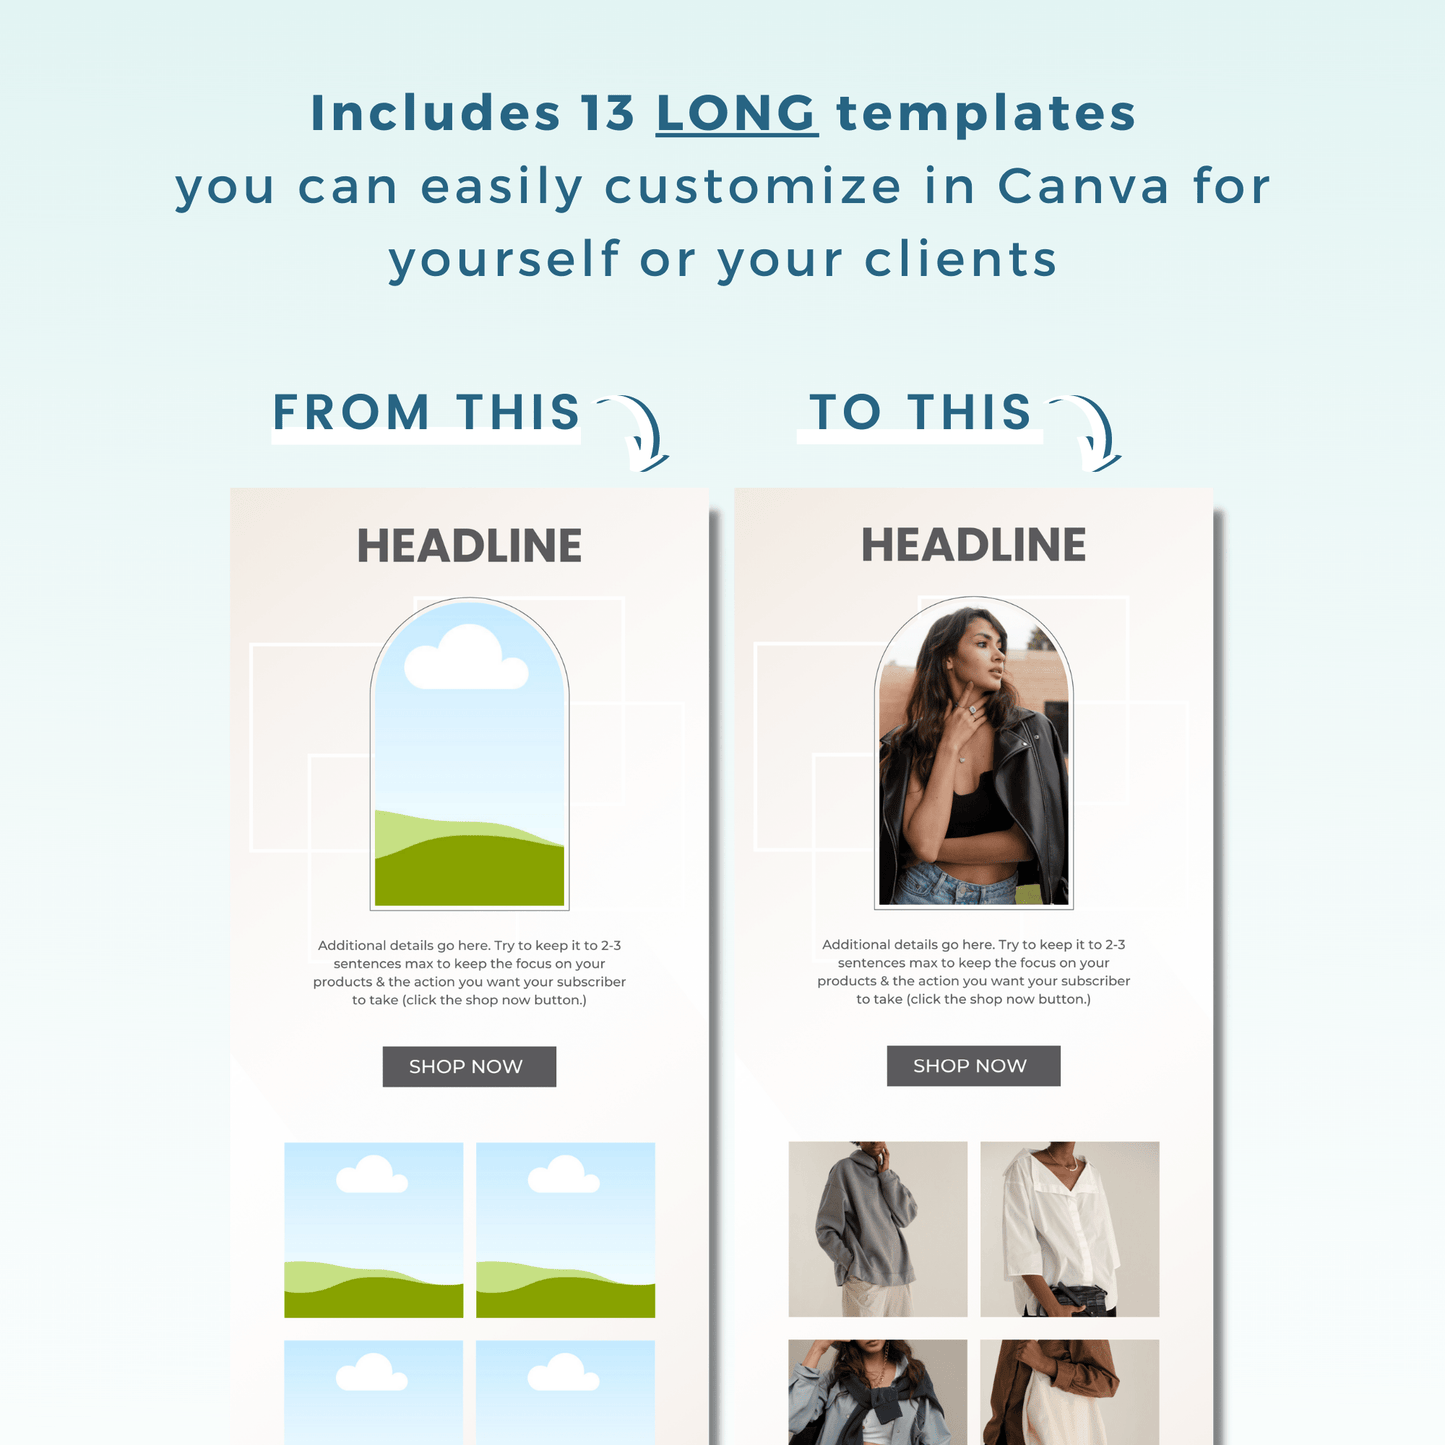 Poppy | Weekly Email Marketing Templates